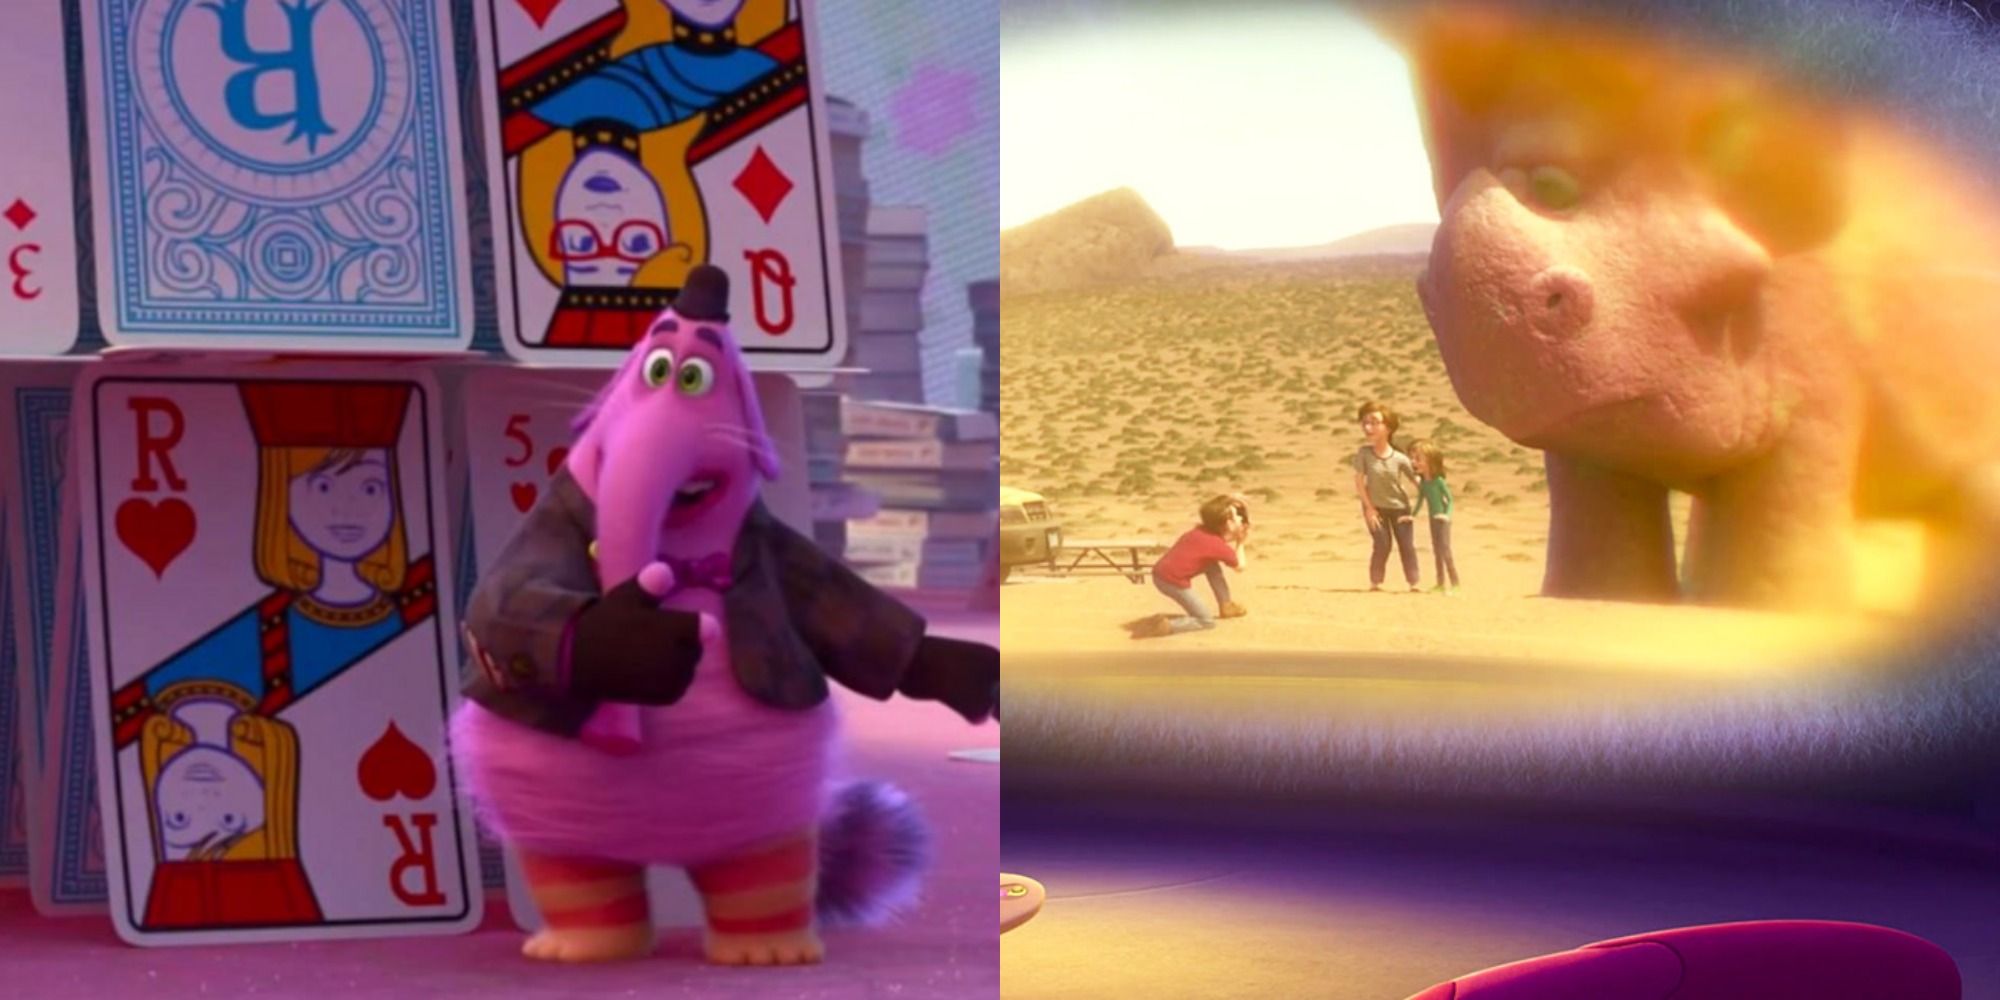 Pixars Inside Out 10 Things You Only Notice After ReWatching